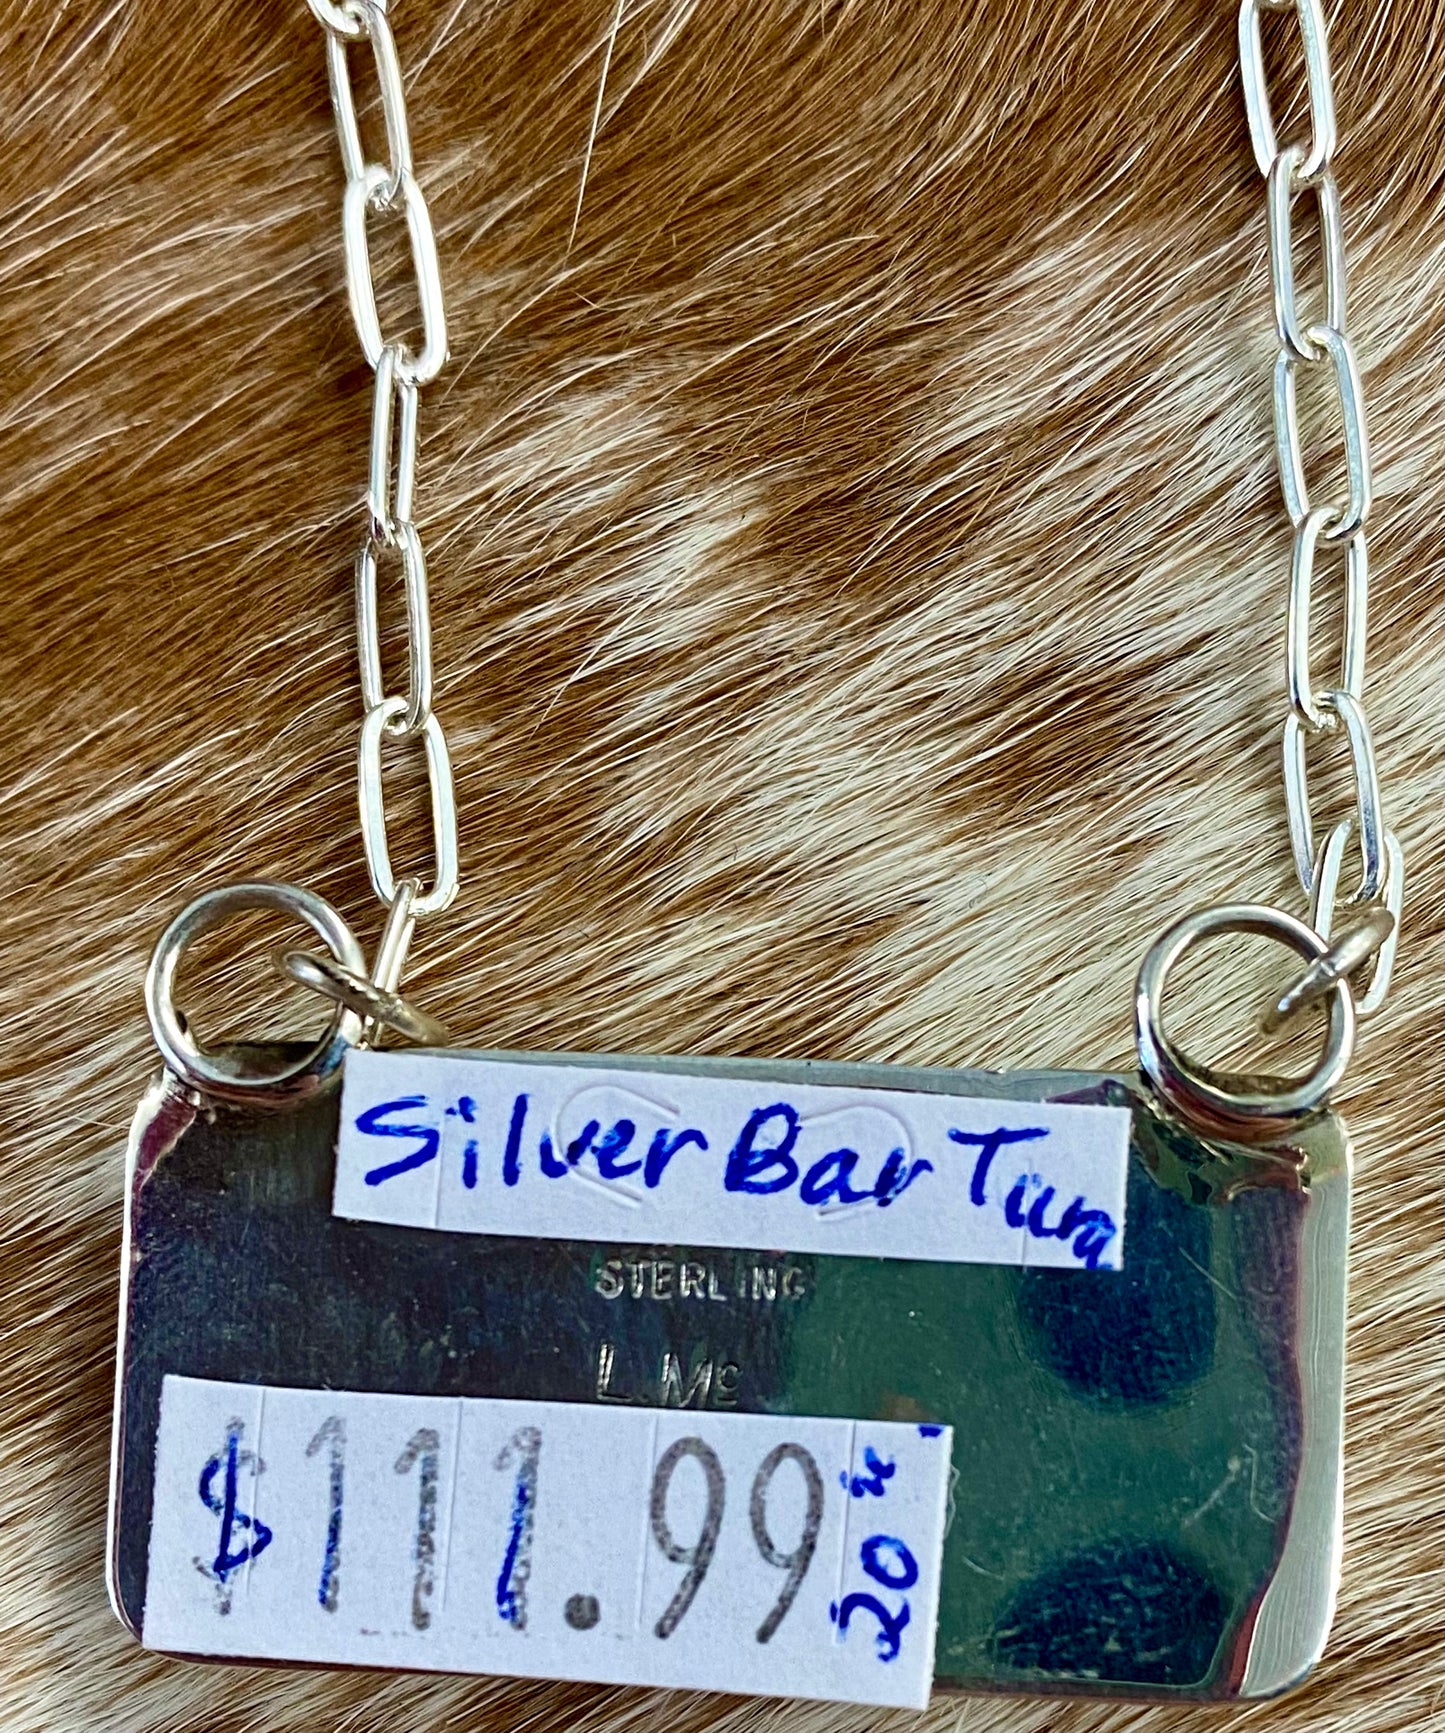 Sterling silver beautiful lightweight turquoise bar chain necklace. Perfect piece to wear alone or layered with other necklaces. Native American handmade by artist silversmith Lee McCray.   Size: 20” inches   Signed: YES  Hallmark/Artist: Lee McCray  Stone: Turquoise Sterling Silver Native American Made Turquoise Bar 20" Inches Necklace